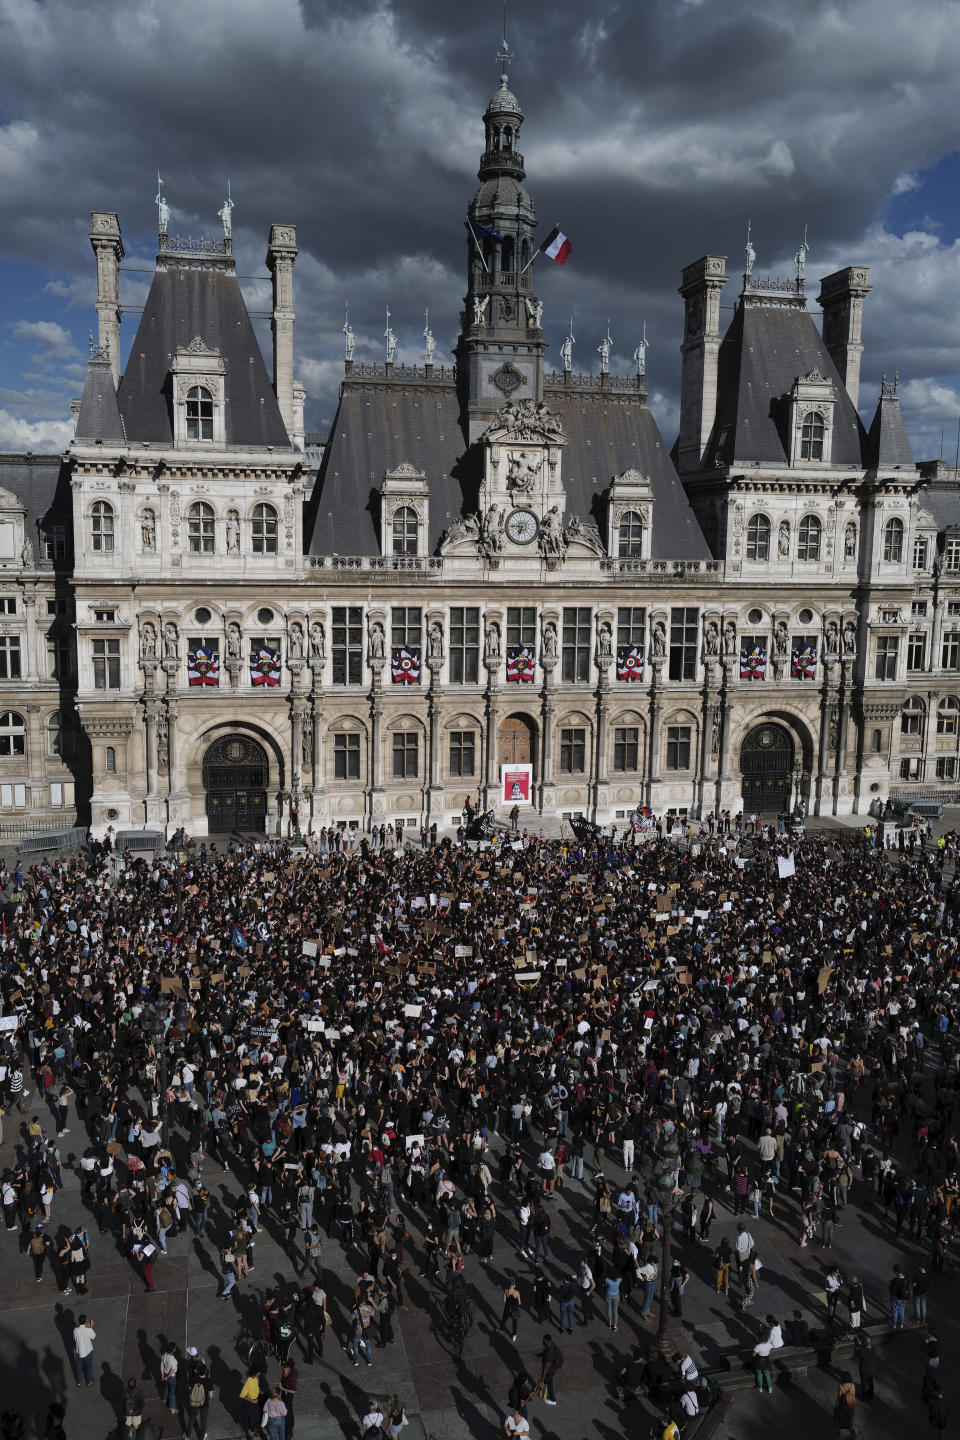 Women's rights activists protest against French President Emmanuel Macron's appointment of an interior minister who has been accused of rape and a justice minister who has criticized the #MeToo movement, in front of Paris city hall, in Paris, France, Friday, July 10, 2020. The French government said it remains committed to gender equality and defended the new ministers, stressing the presumption of innocence. Gerald Darmanin, Interior Minister, firmly denies the rape accusation, and an investigation is underway. New Justice Minister Eric Dupond-Moretti is a lawyer who has defended a government member accused of rape and sexual assault, and has ridiculed women speaking out thanks to the #MeToo movement. (AP Photo/Francois Mori)